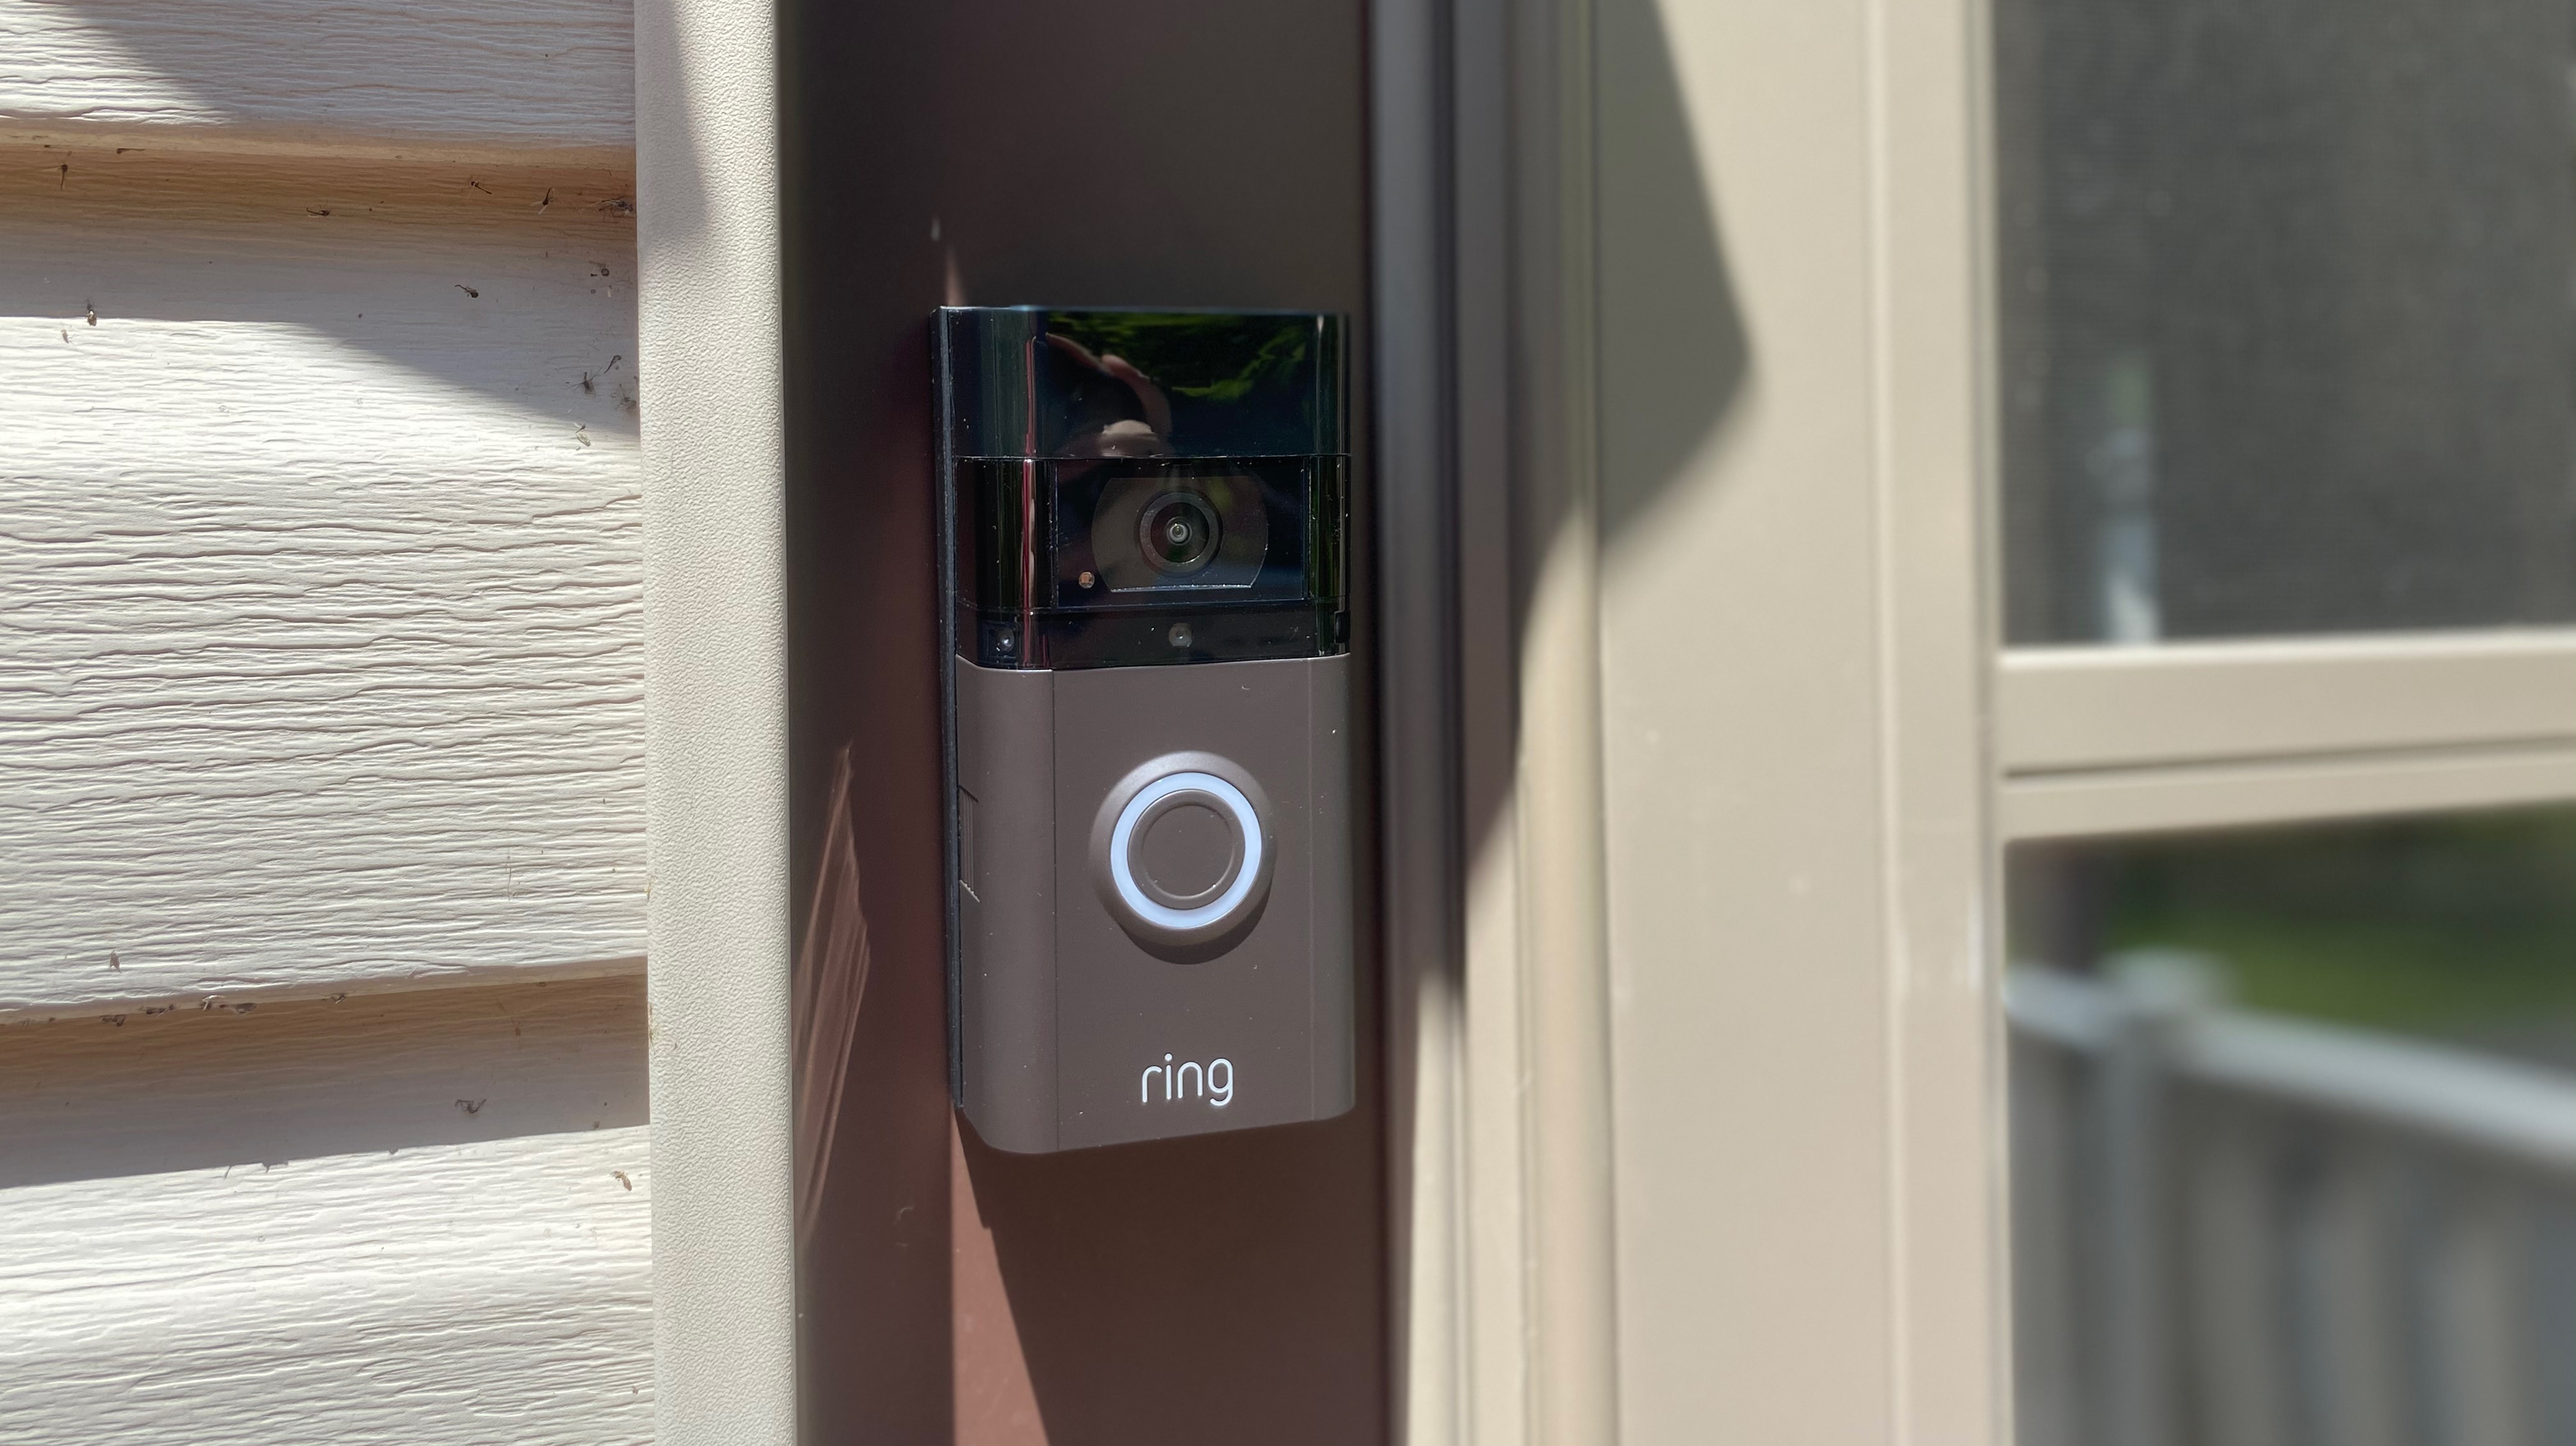 is it easy to install the ring doorbell